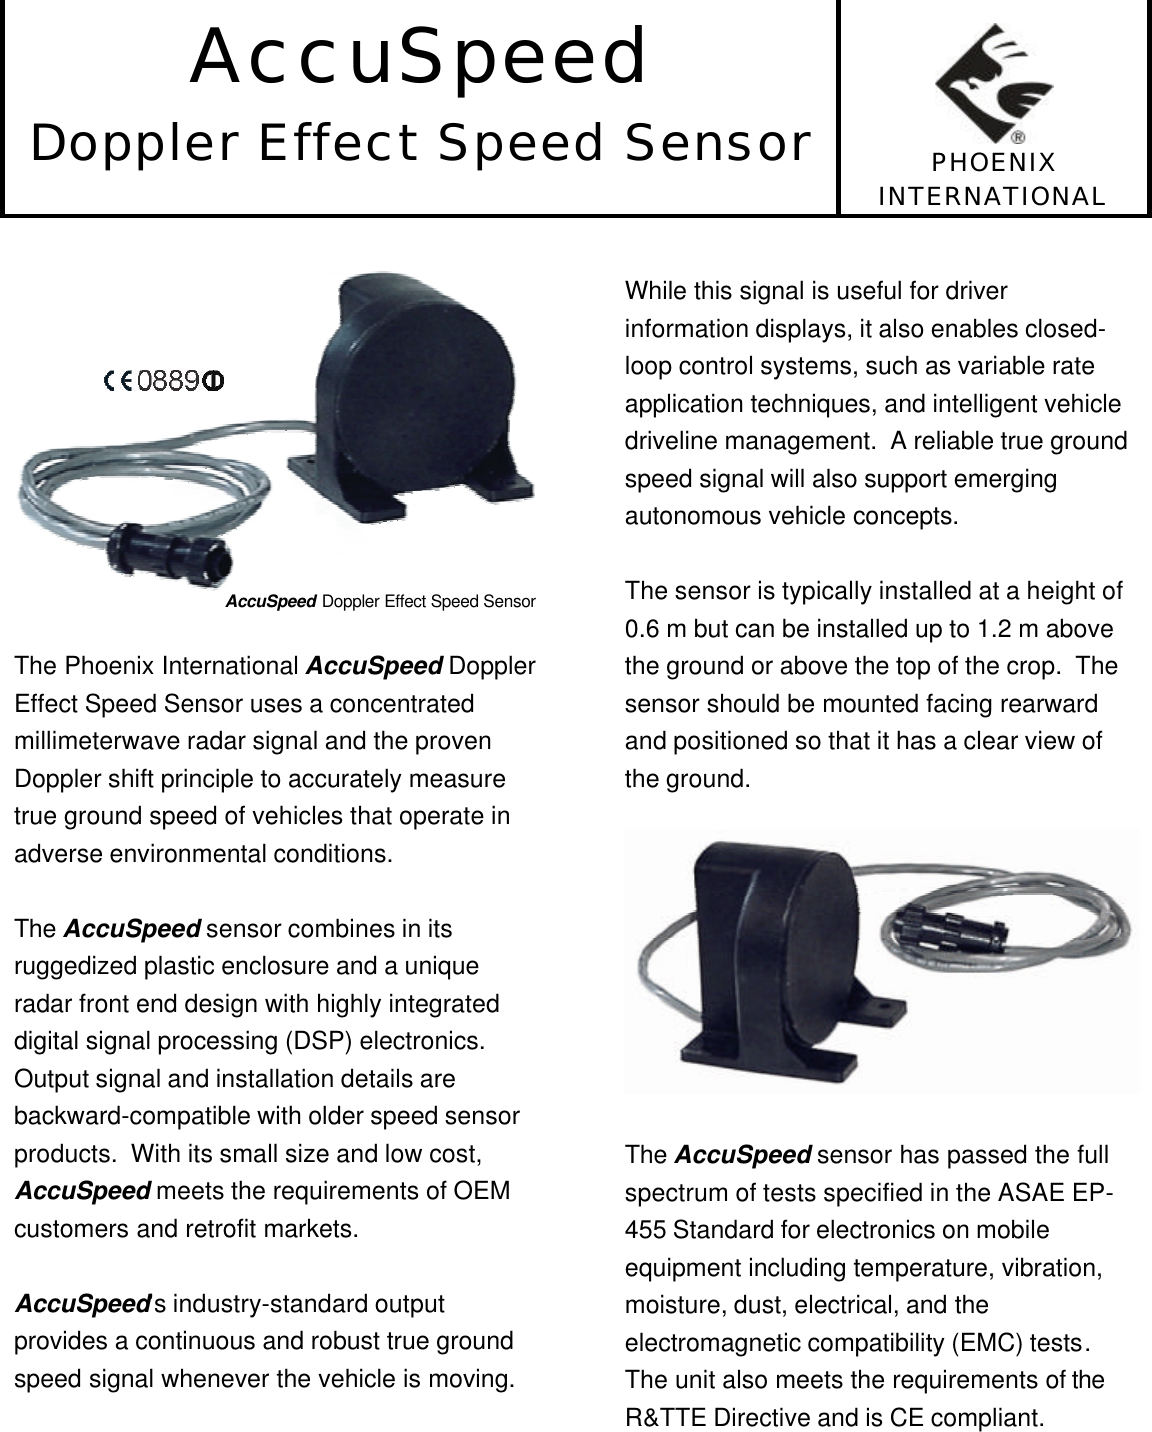 AccuSpeedDoppler Effect Speed Sensor PHOENIXINTERNATIONALAccuSpeed Doppler Effect Speed SensorThe Phoenix International AccuSpeed DopplerEffect Speed Sensor uses a concentratedmillimeterwave radar signal and the provenDoppler shift principle to accurately measuretrue ground speed of vehicles that operate inadverse environmental conditions.The AccuSpeed sensor combines in itsruggedized plastic enclosure and a uniqueradar front end design with highly integrateddigital signal processing (DSP) electronics.Output signal and installation details arebackward-compatible with older speed sensorproducts.  With its small size and low cost,AccuSpeed meets the requirements of OEMcustomers and retrofit markets.AccuSpeed’s industry-standard outputprovides a continuous and robust true groundspeed signal whenever the vehicle is moving.While this signal is useful for driverinformation displays, it also enables closed-loop control systems, such as variable rateapplication techniques, and intelligent vehicledriveline management.  A reliable true groundspeed signal will also support emergingautonomous vehicle concepts.The sensor is typically installed at a height of0.6 m but can be installed up to 1.2 m abovethe ground or above the top of the crop.  Thesensor should be mounted facing rearwardand positioned so that it has a clear view ofthe ground.The AccuSpeed sensor has passed the fullspectrum of tests specified in the ASAE EP-455 Standard for electronics on mobileequipment including temperature, vibration,moisture, dust, electrical, and theelectromagnetic compatibility (EMC) tests.The unit also meets the requirements of theR&amp;TTE Directive and is CE compliant.